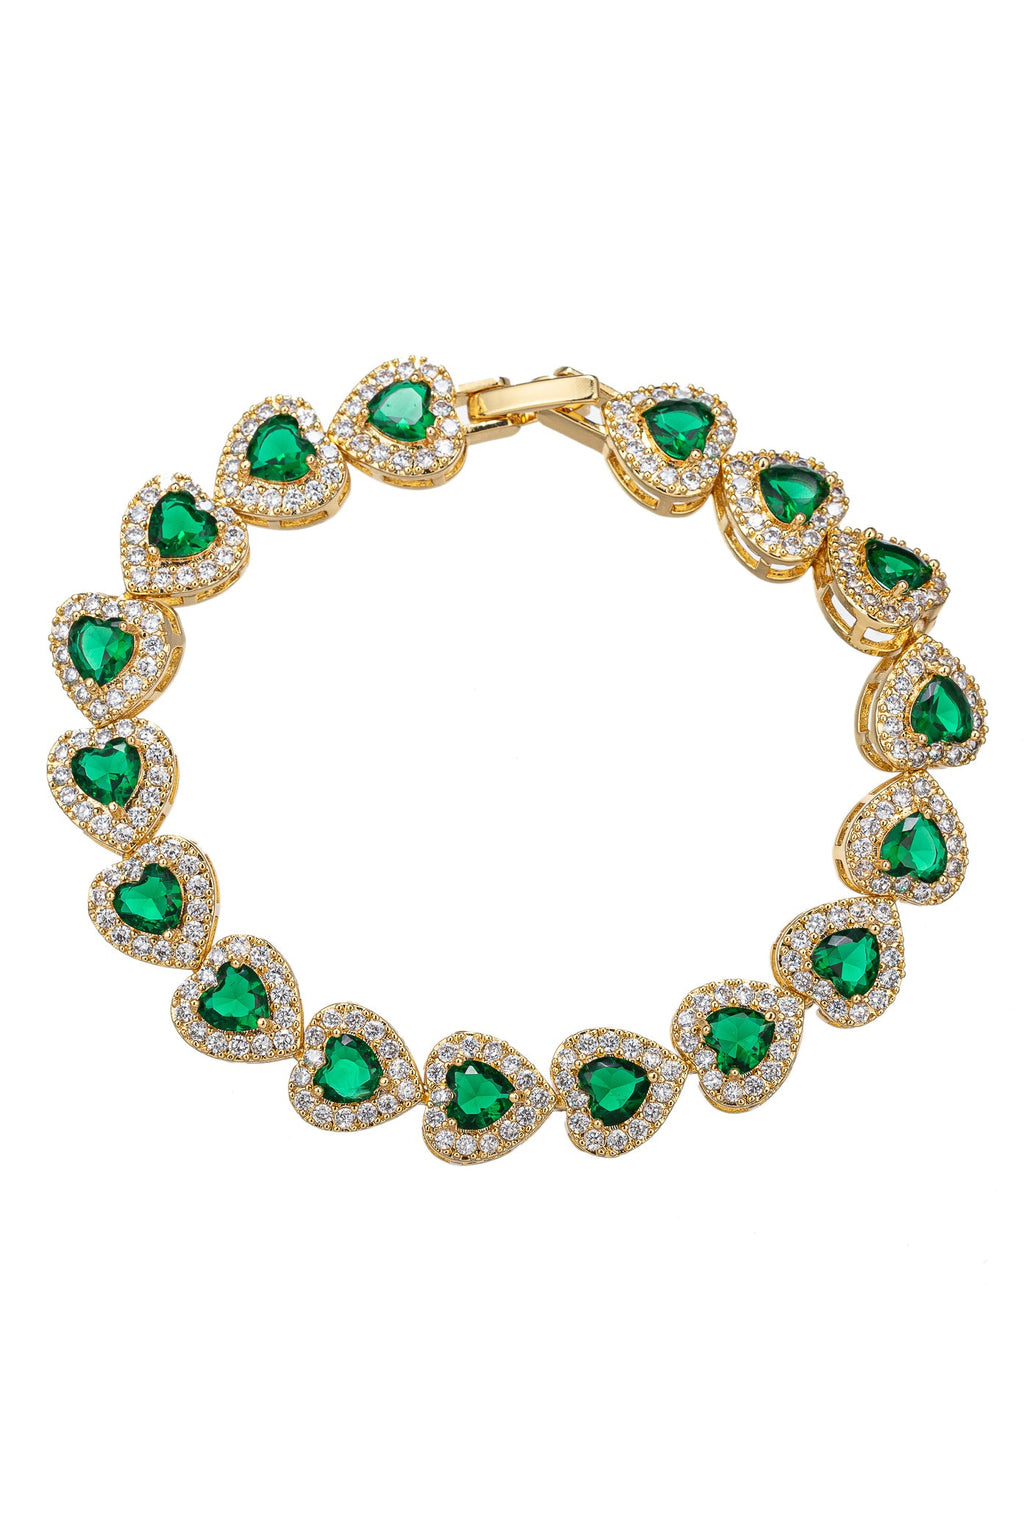 Green Maja Cubic Zirconia Bracelet: A Touch of Nature's Beauty.